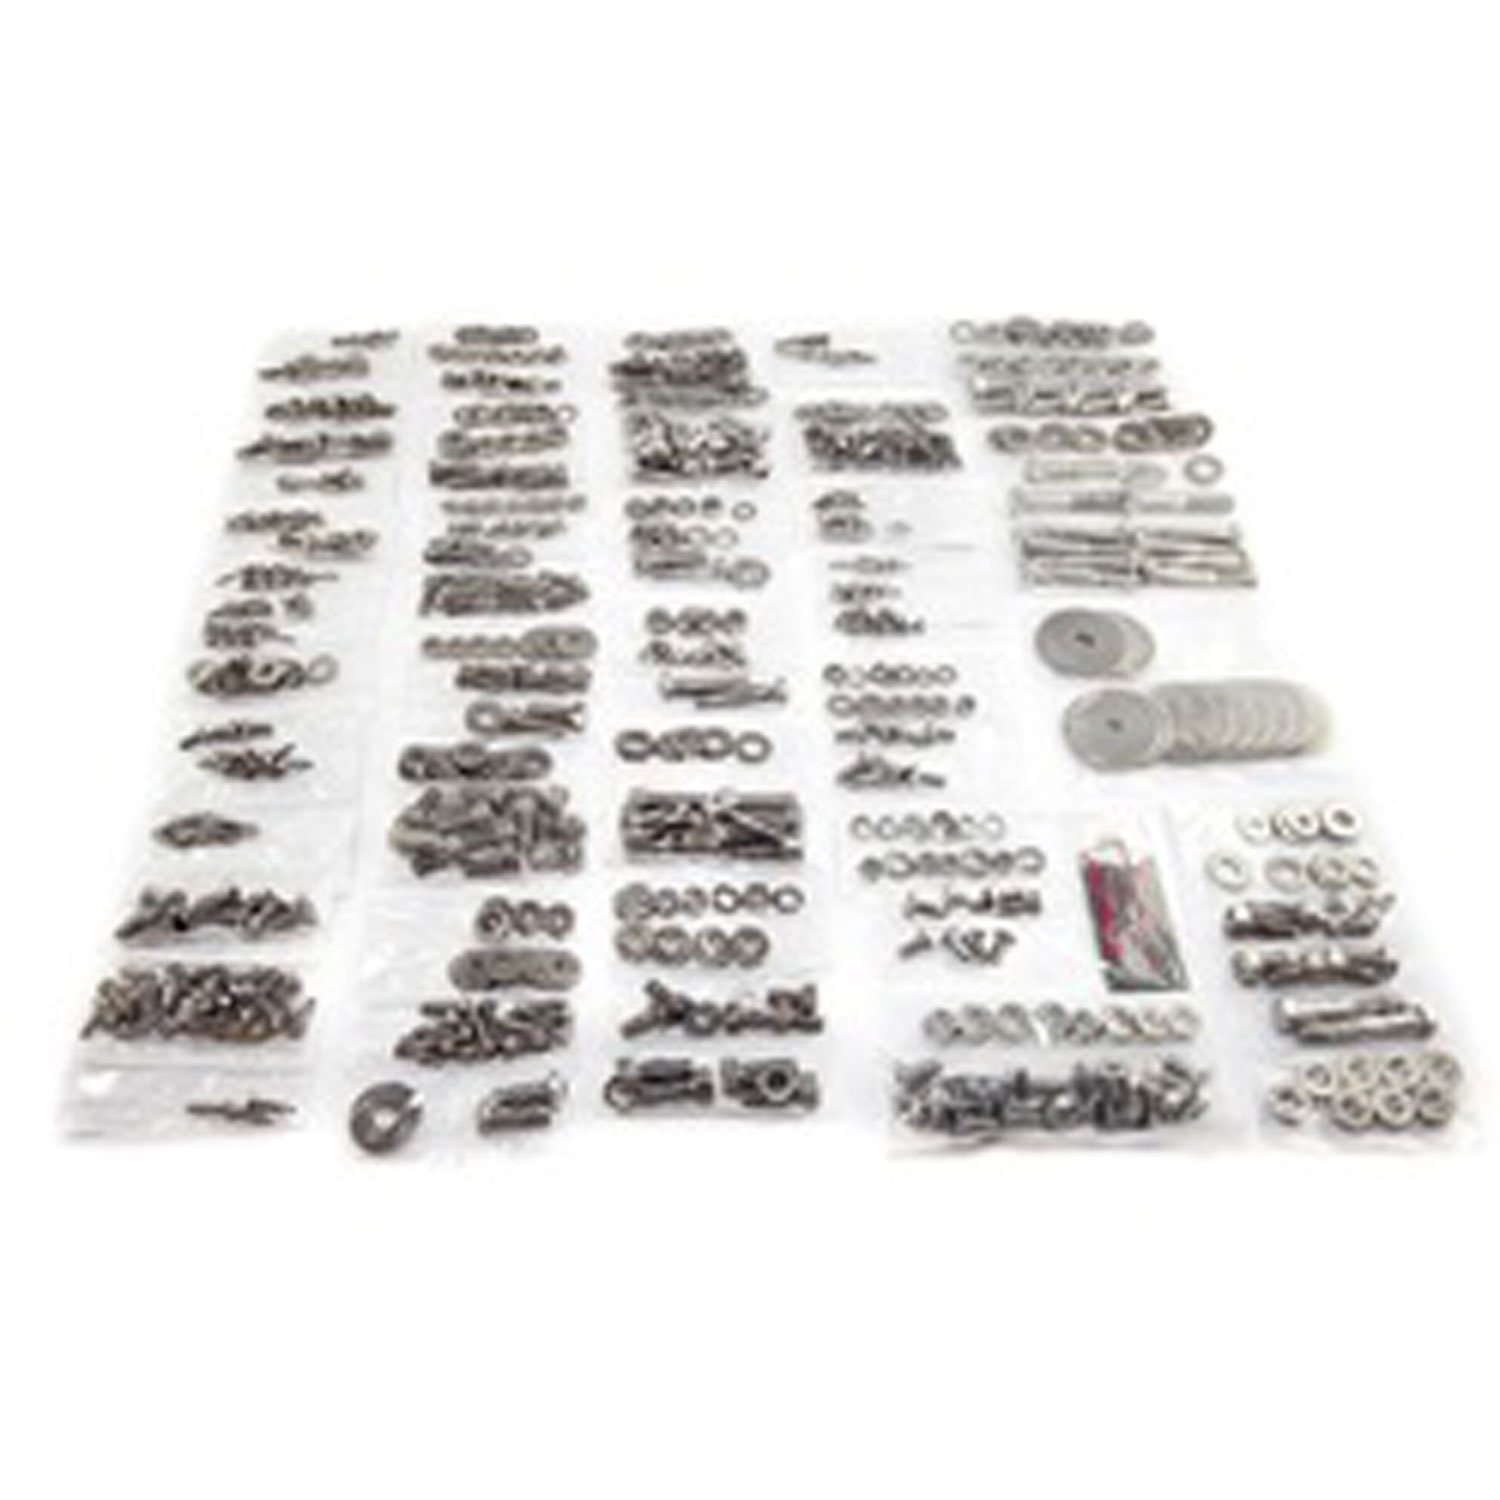 This 582 piece stainless steel body fastener kit from Omix-ADA gives you all the necessary fasteners